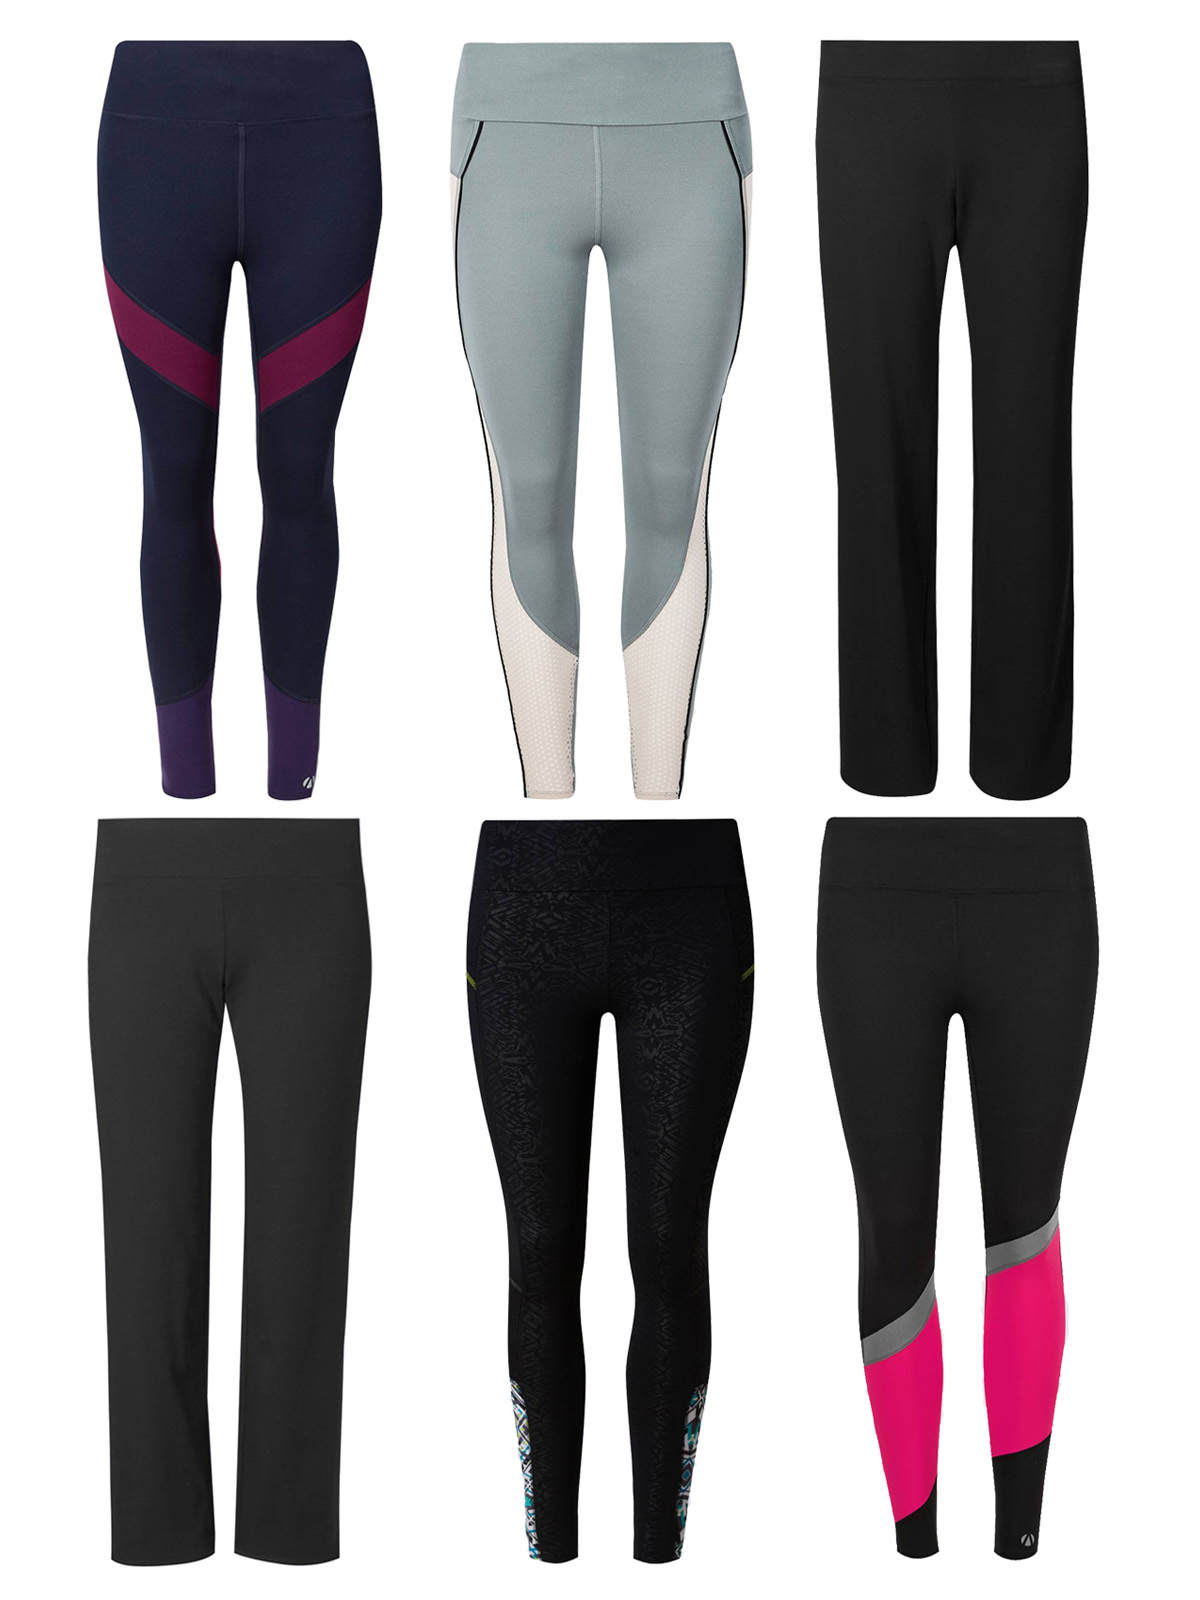 Marks and Spencer - - M&5 ASSORTED Leggings & Joggers - Size 8 to 20